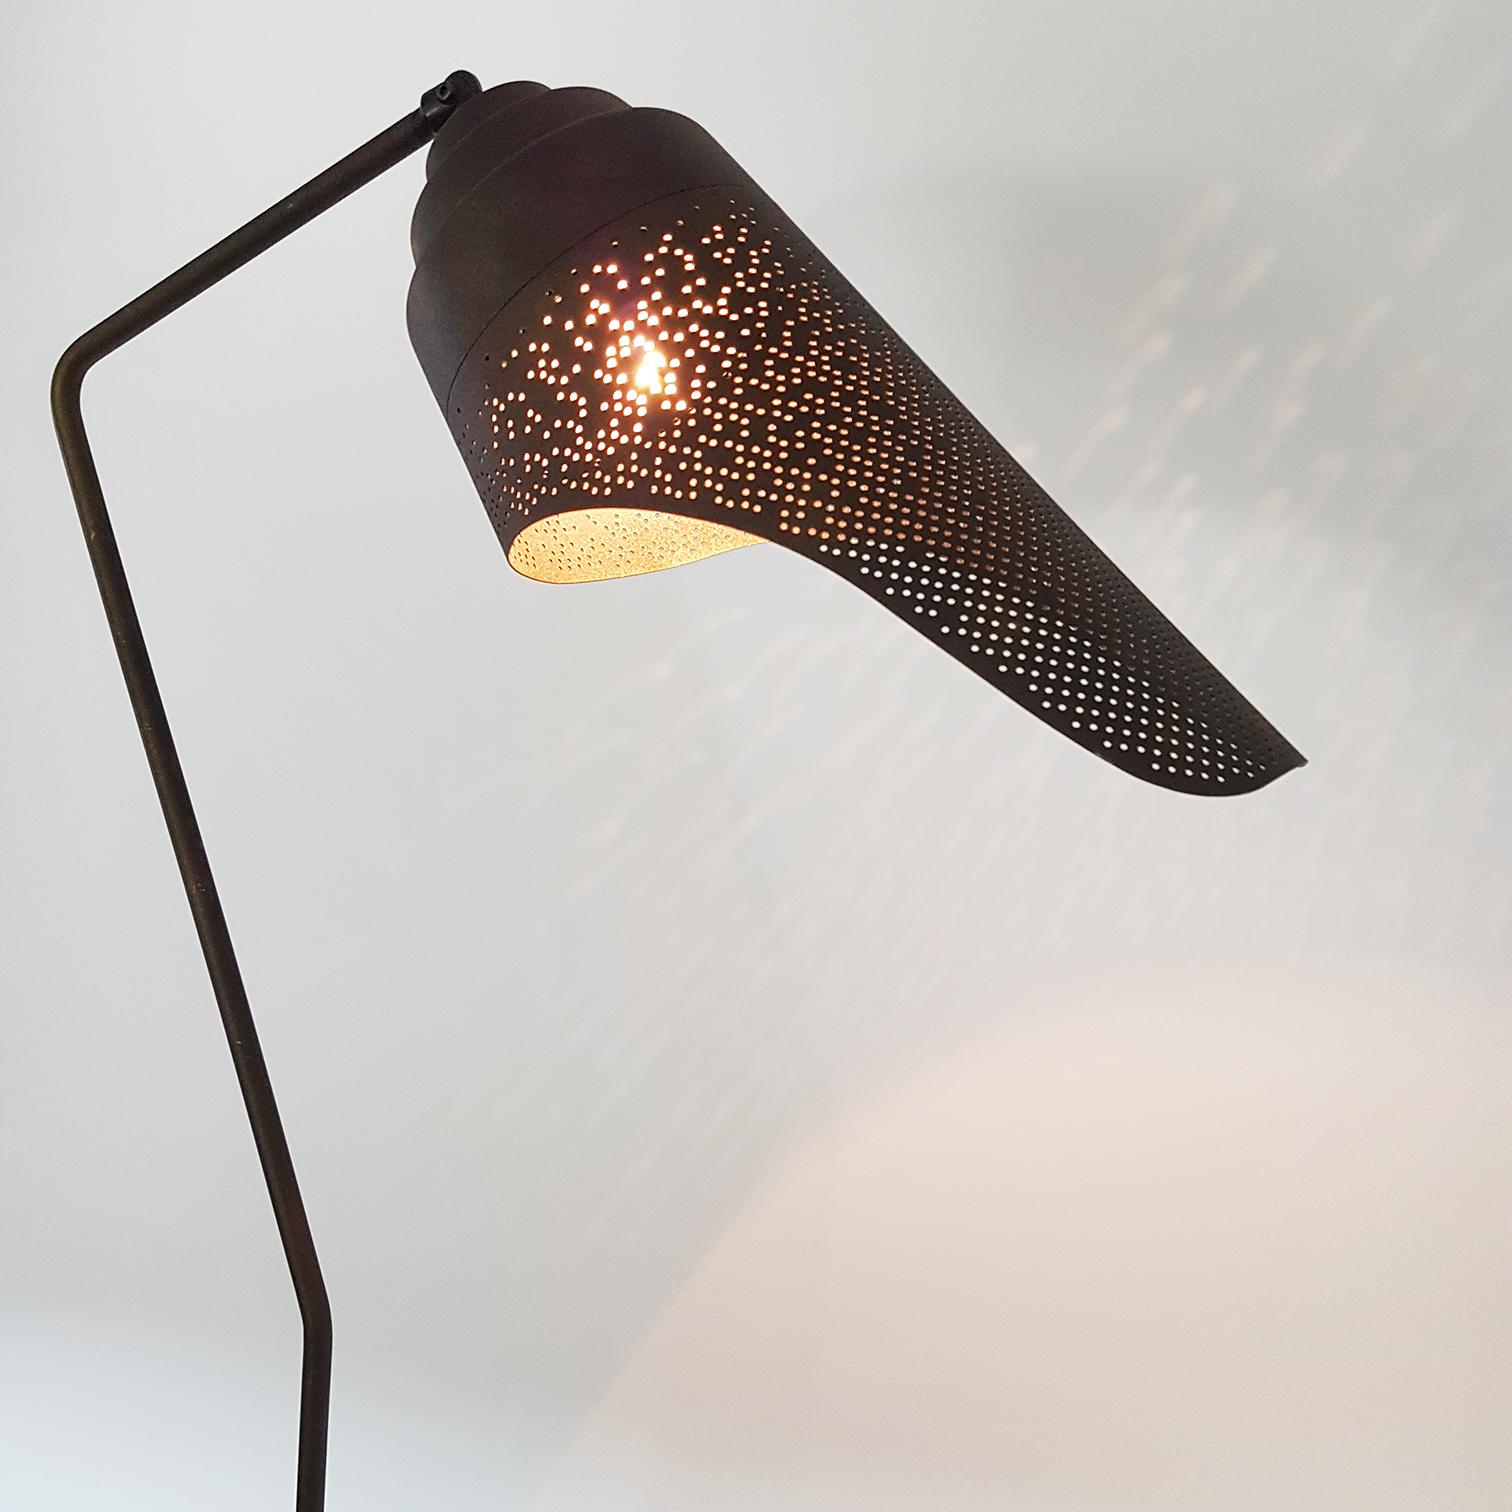 A beautiful /black brown l floor lamp by Diesel with Foscarini, 2001. Metal with a adjustable perforated diffuser. 

In very good vintage condition. Adjustable perforated diffuser - Energy saver halogen bulb (not included): 1 x 42W max (E14).